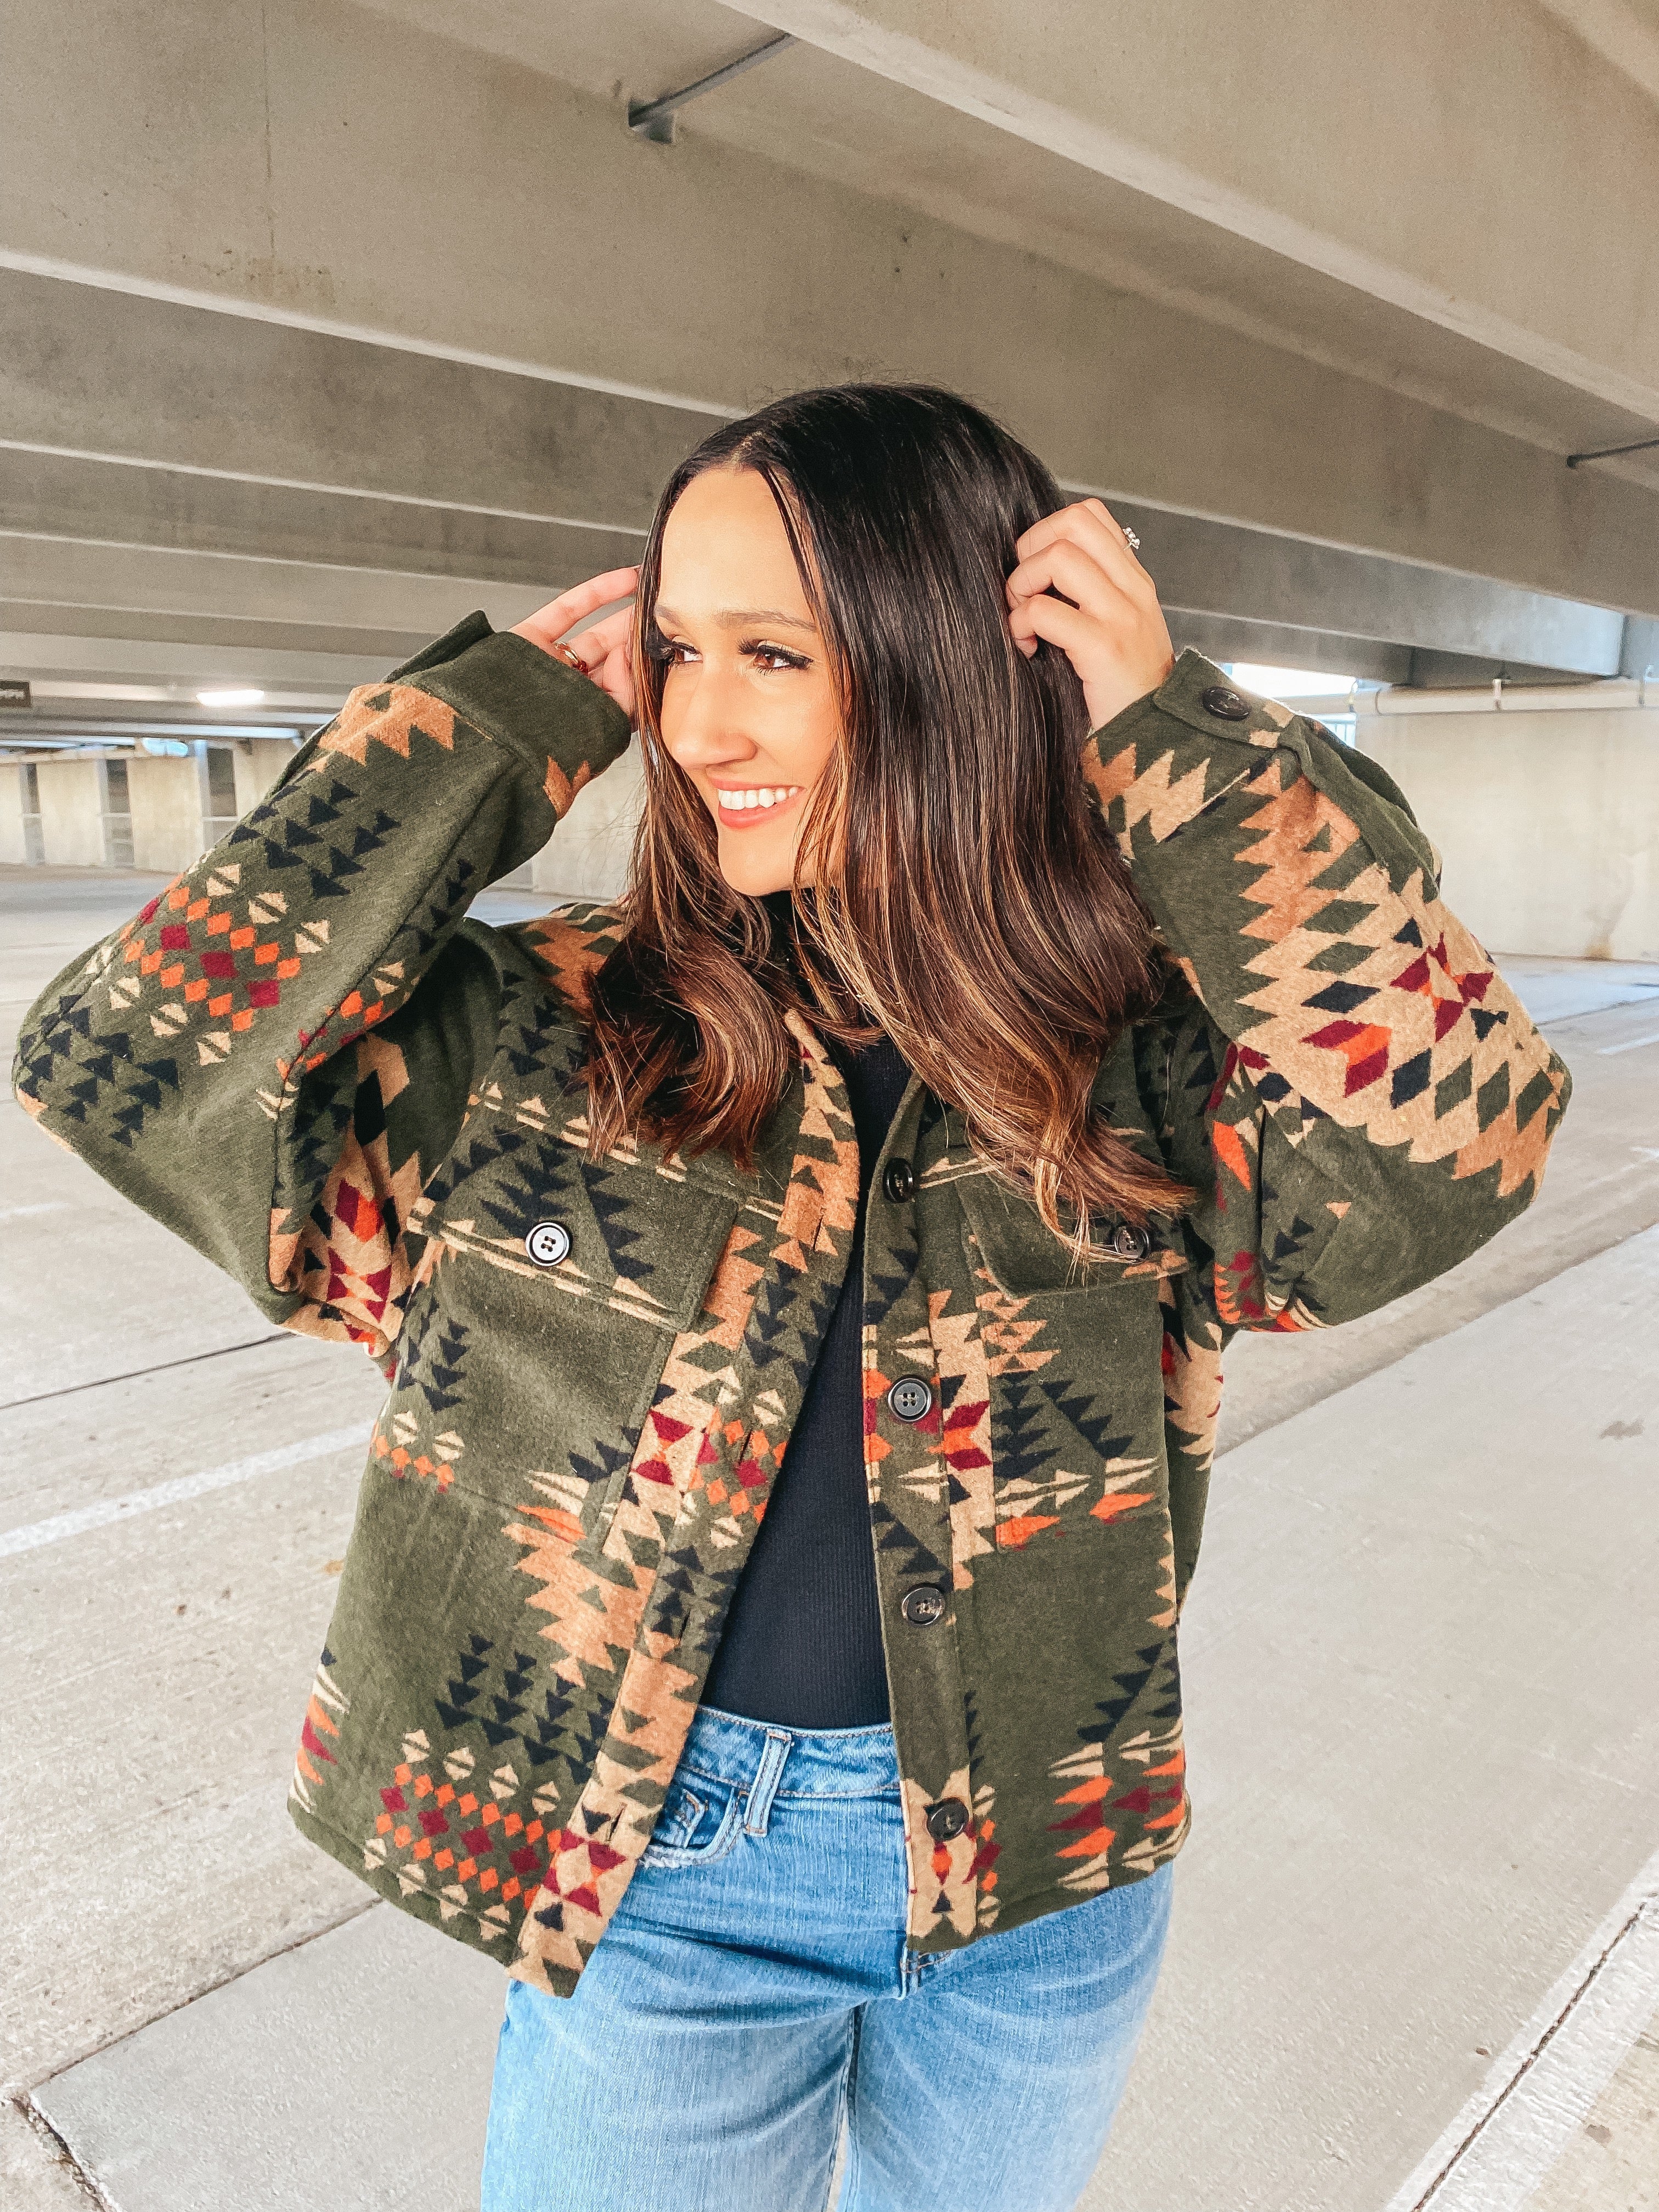 S'mores Weather Aztec Print Button Up Jacket in Olive Green - Giddy Up Glamour Boutique